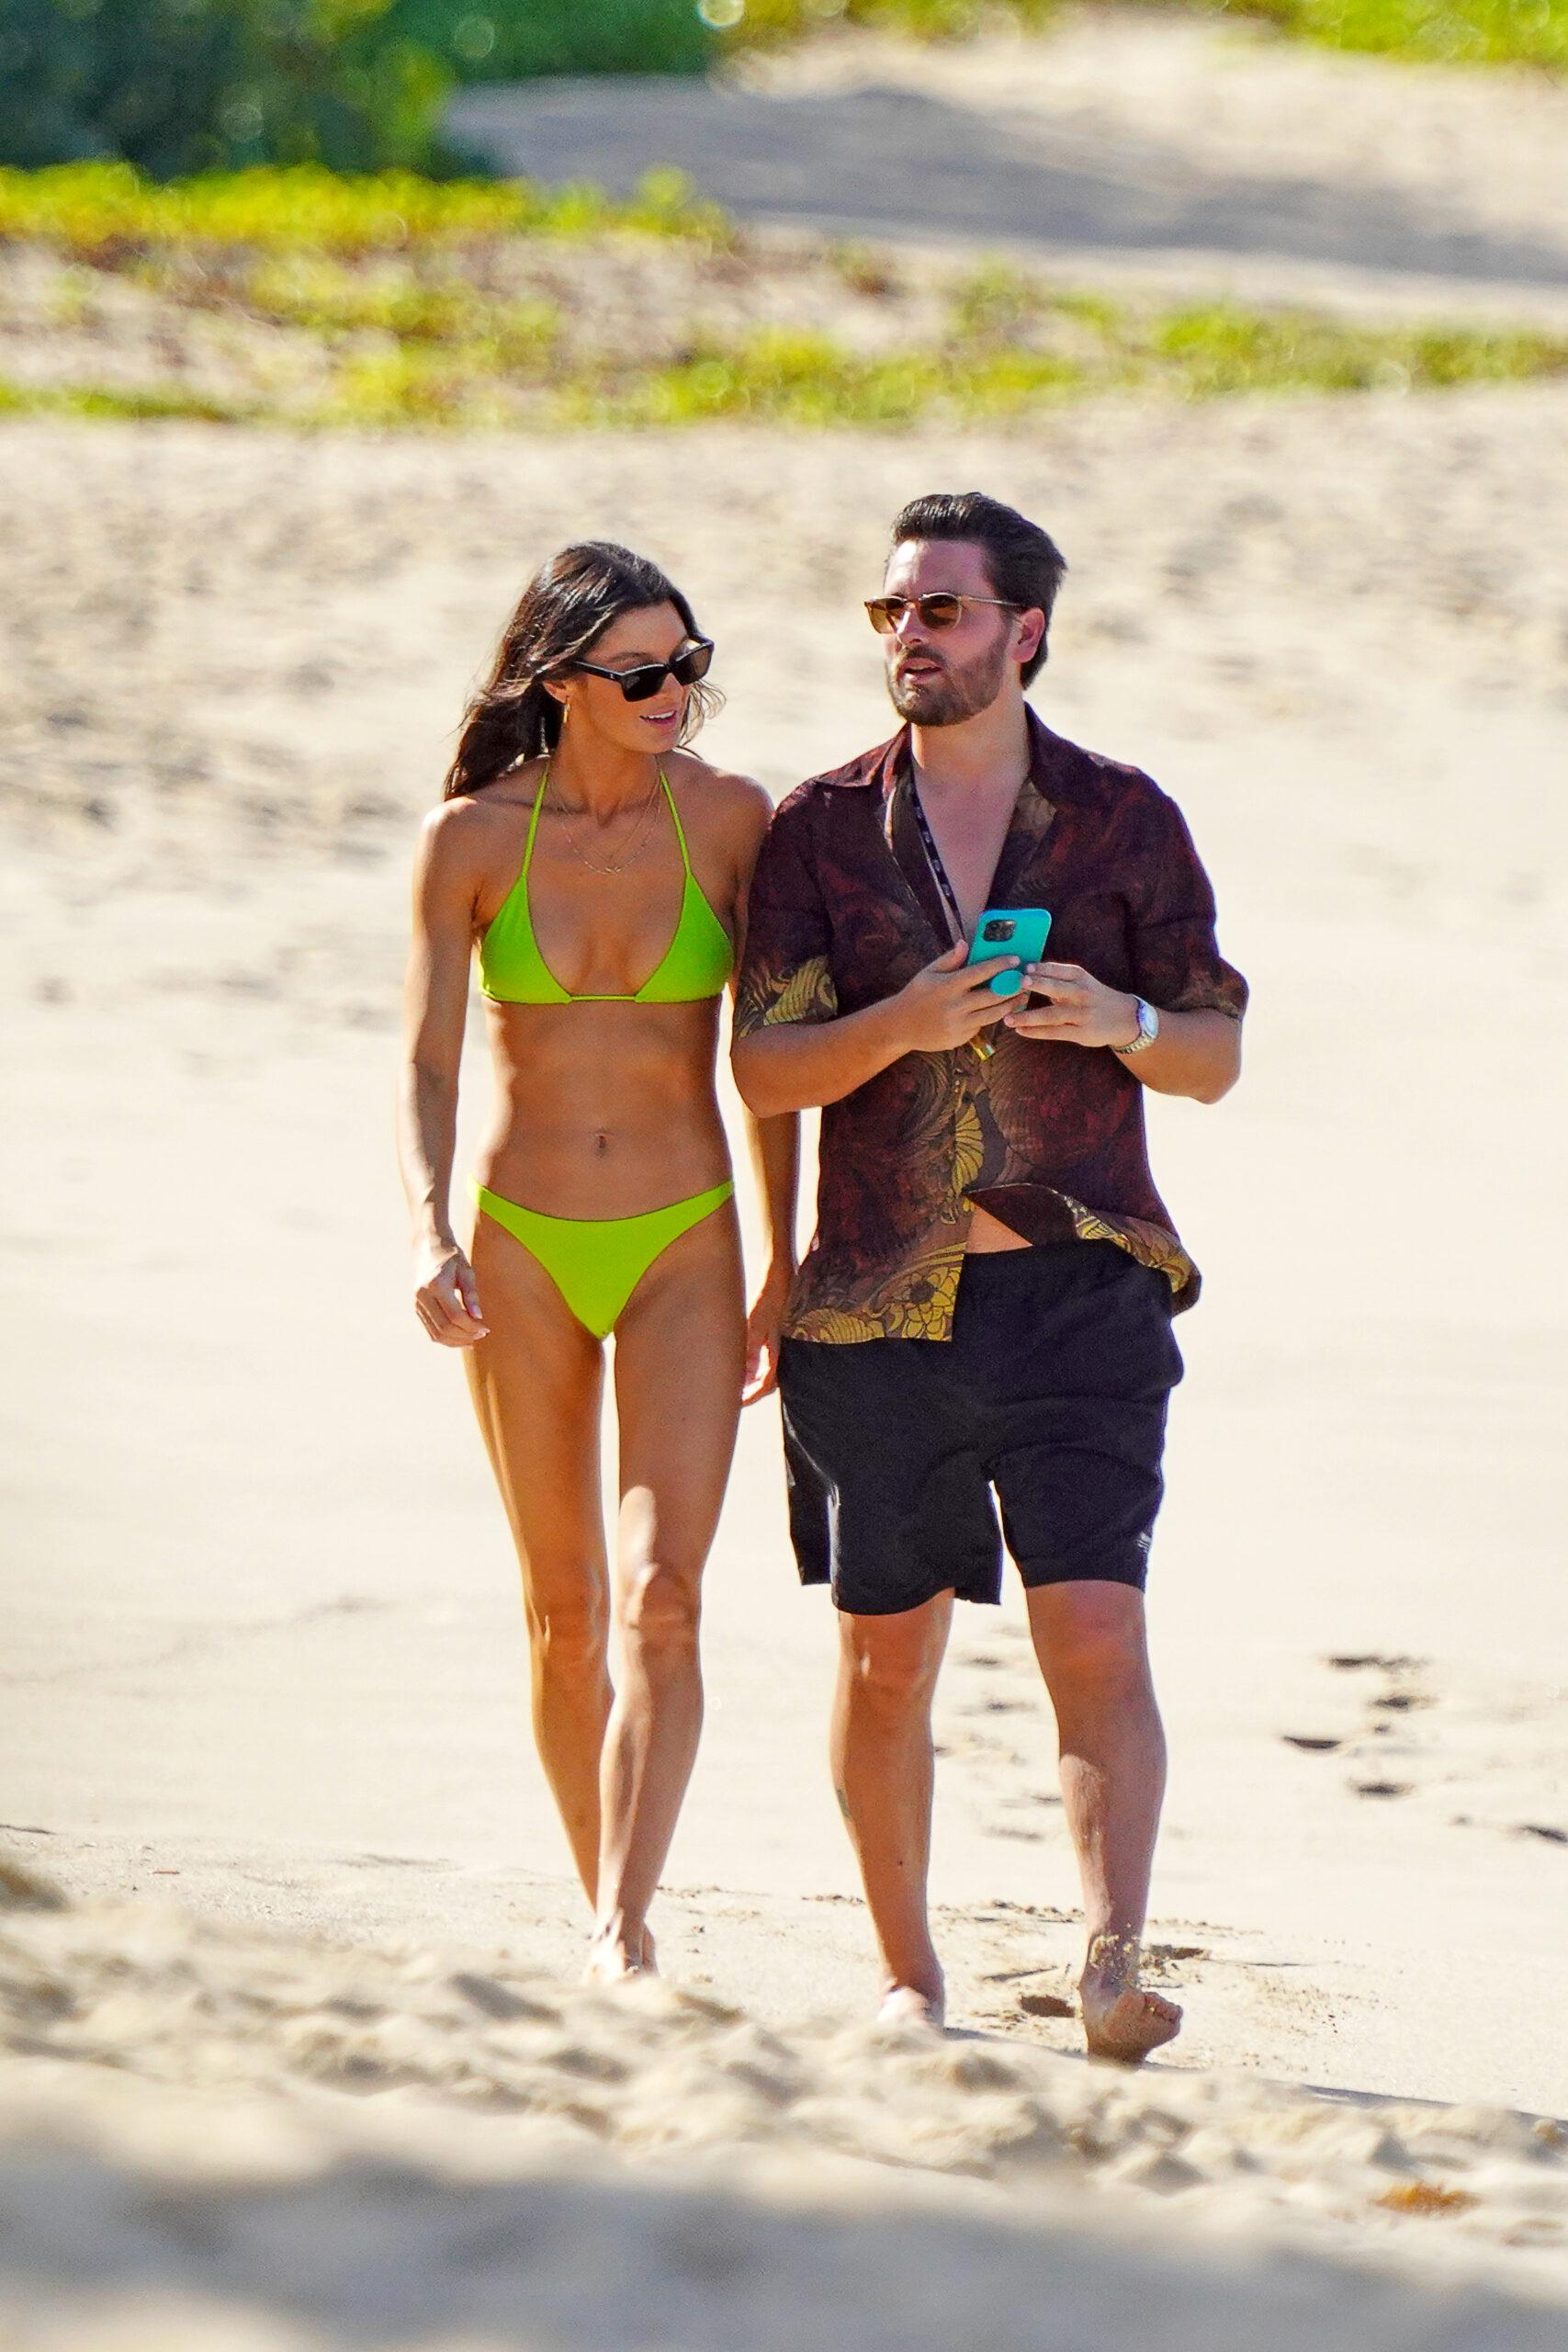 Scott Disick and model Bella Banos is seen strolling one of the beaches during holidays season in St-Barts